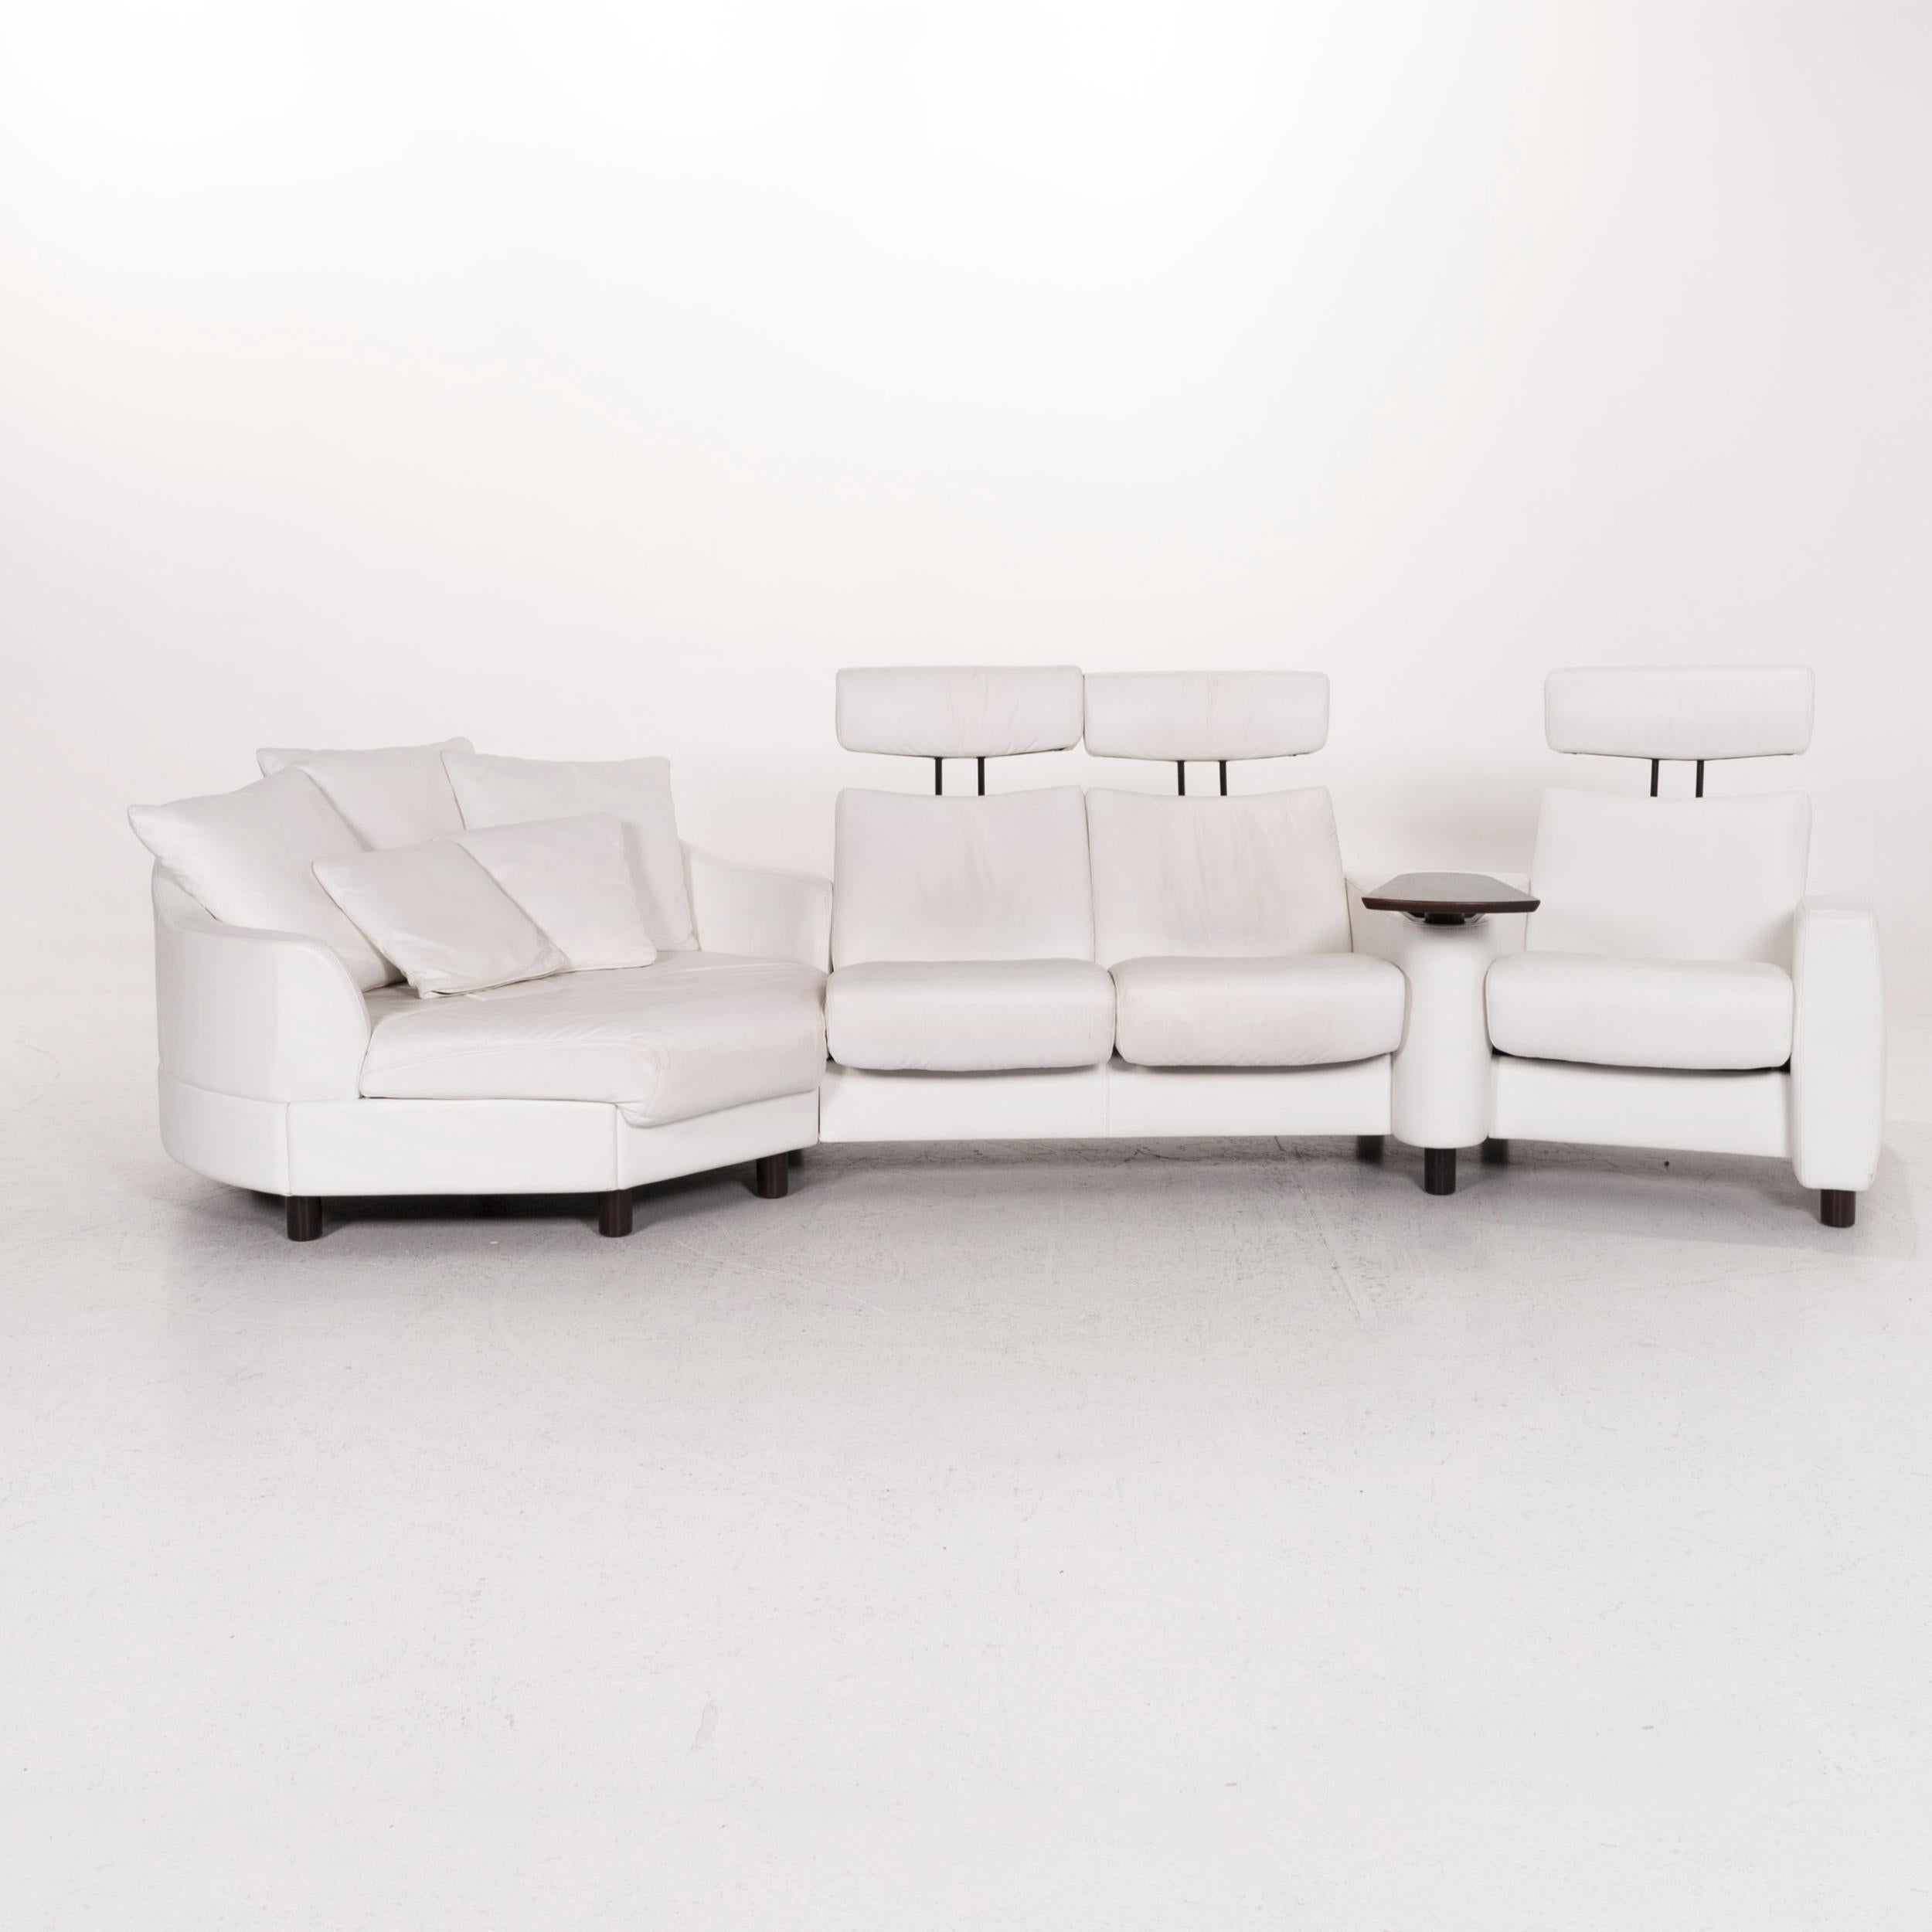 We bring to you a stressless Arion leather corner sofa white function couch.

 

 Product measurements in centimeters:
 

Depth 83
Width 355
Height 98
Seat-height 44
Rest-height 60
Seat-depth 50
Seat-width 213
Back-height 57.